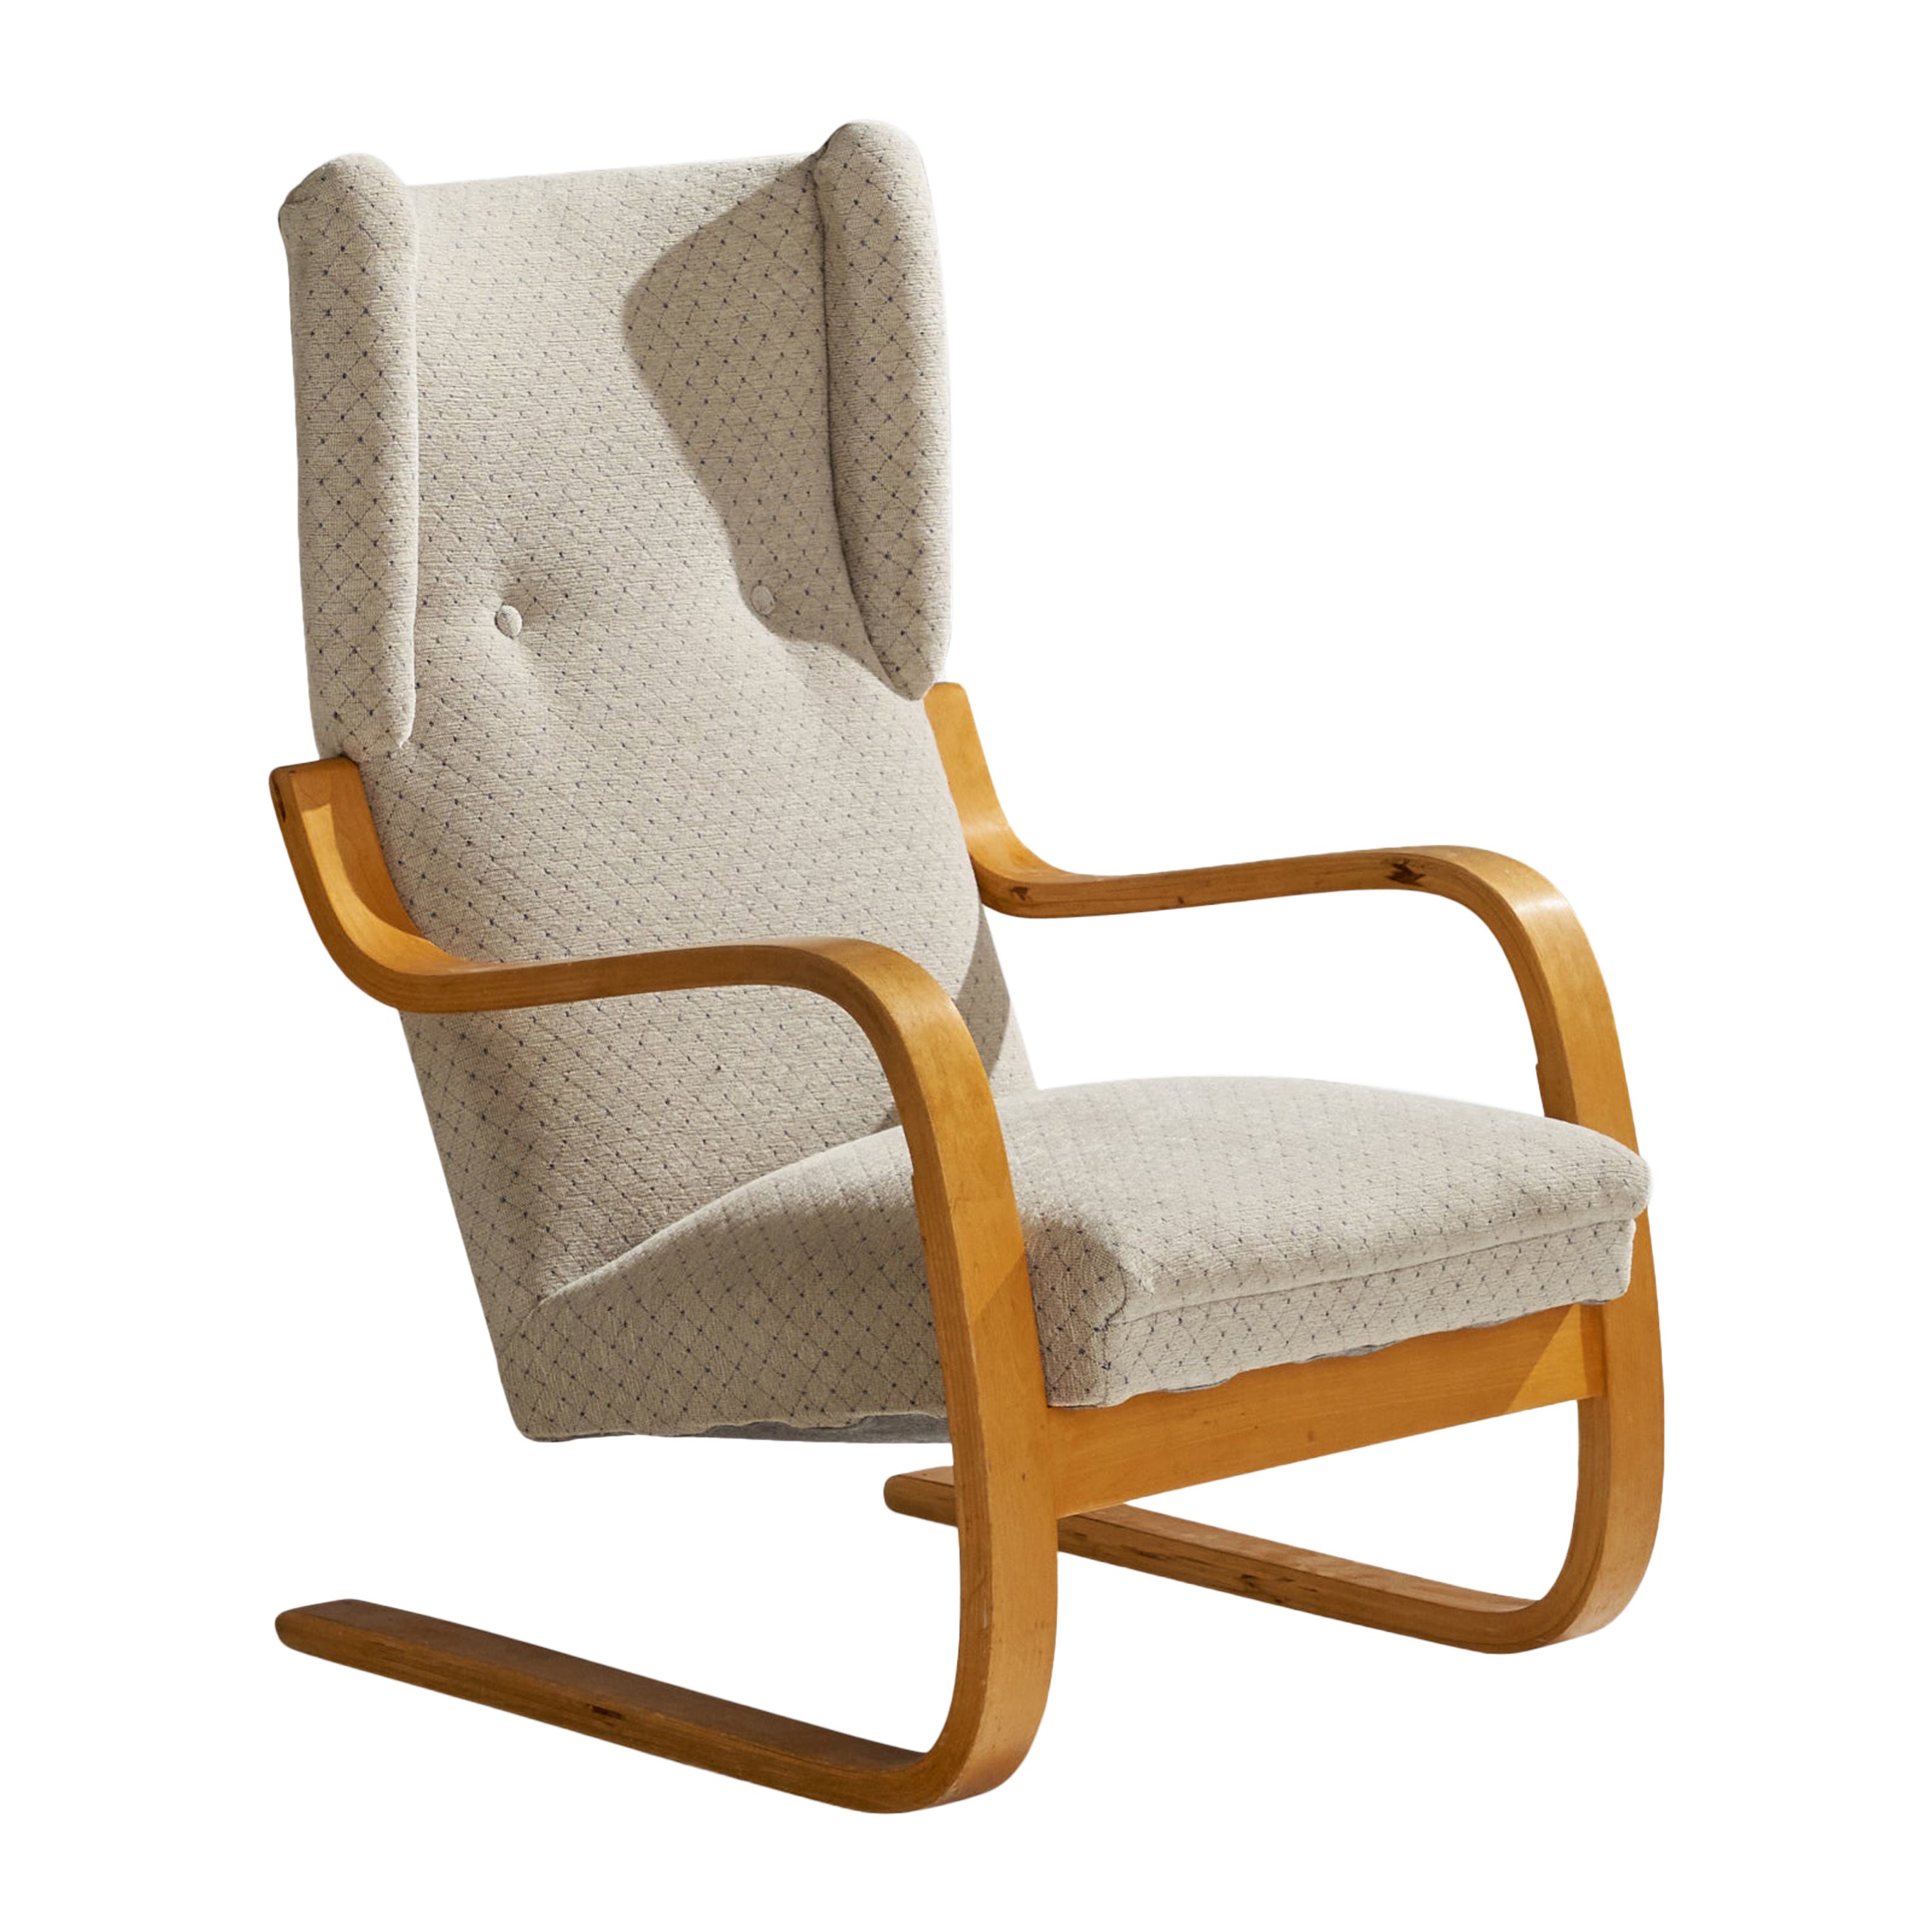 Alvar Aalto, Lounge Chair, Birch, Fabric, Finland, 1970s For Sale